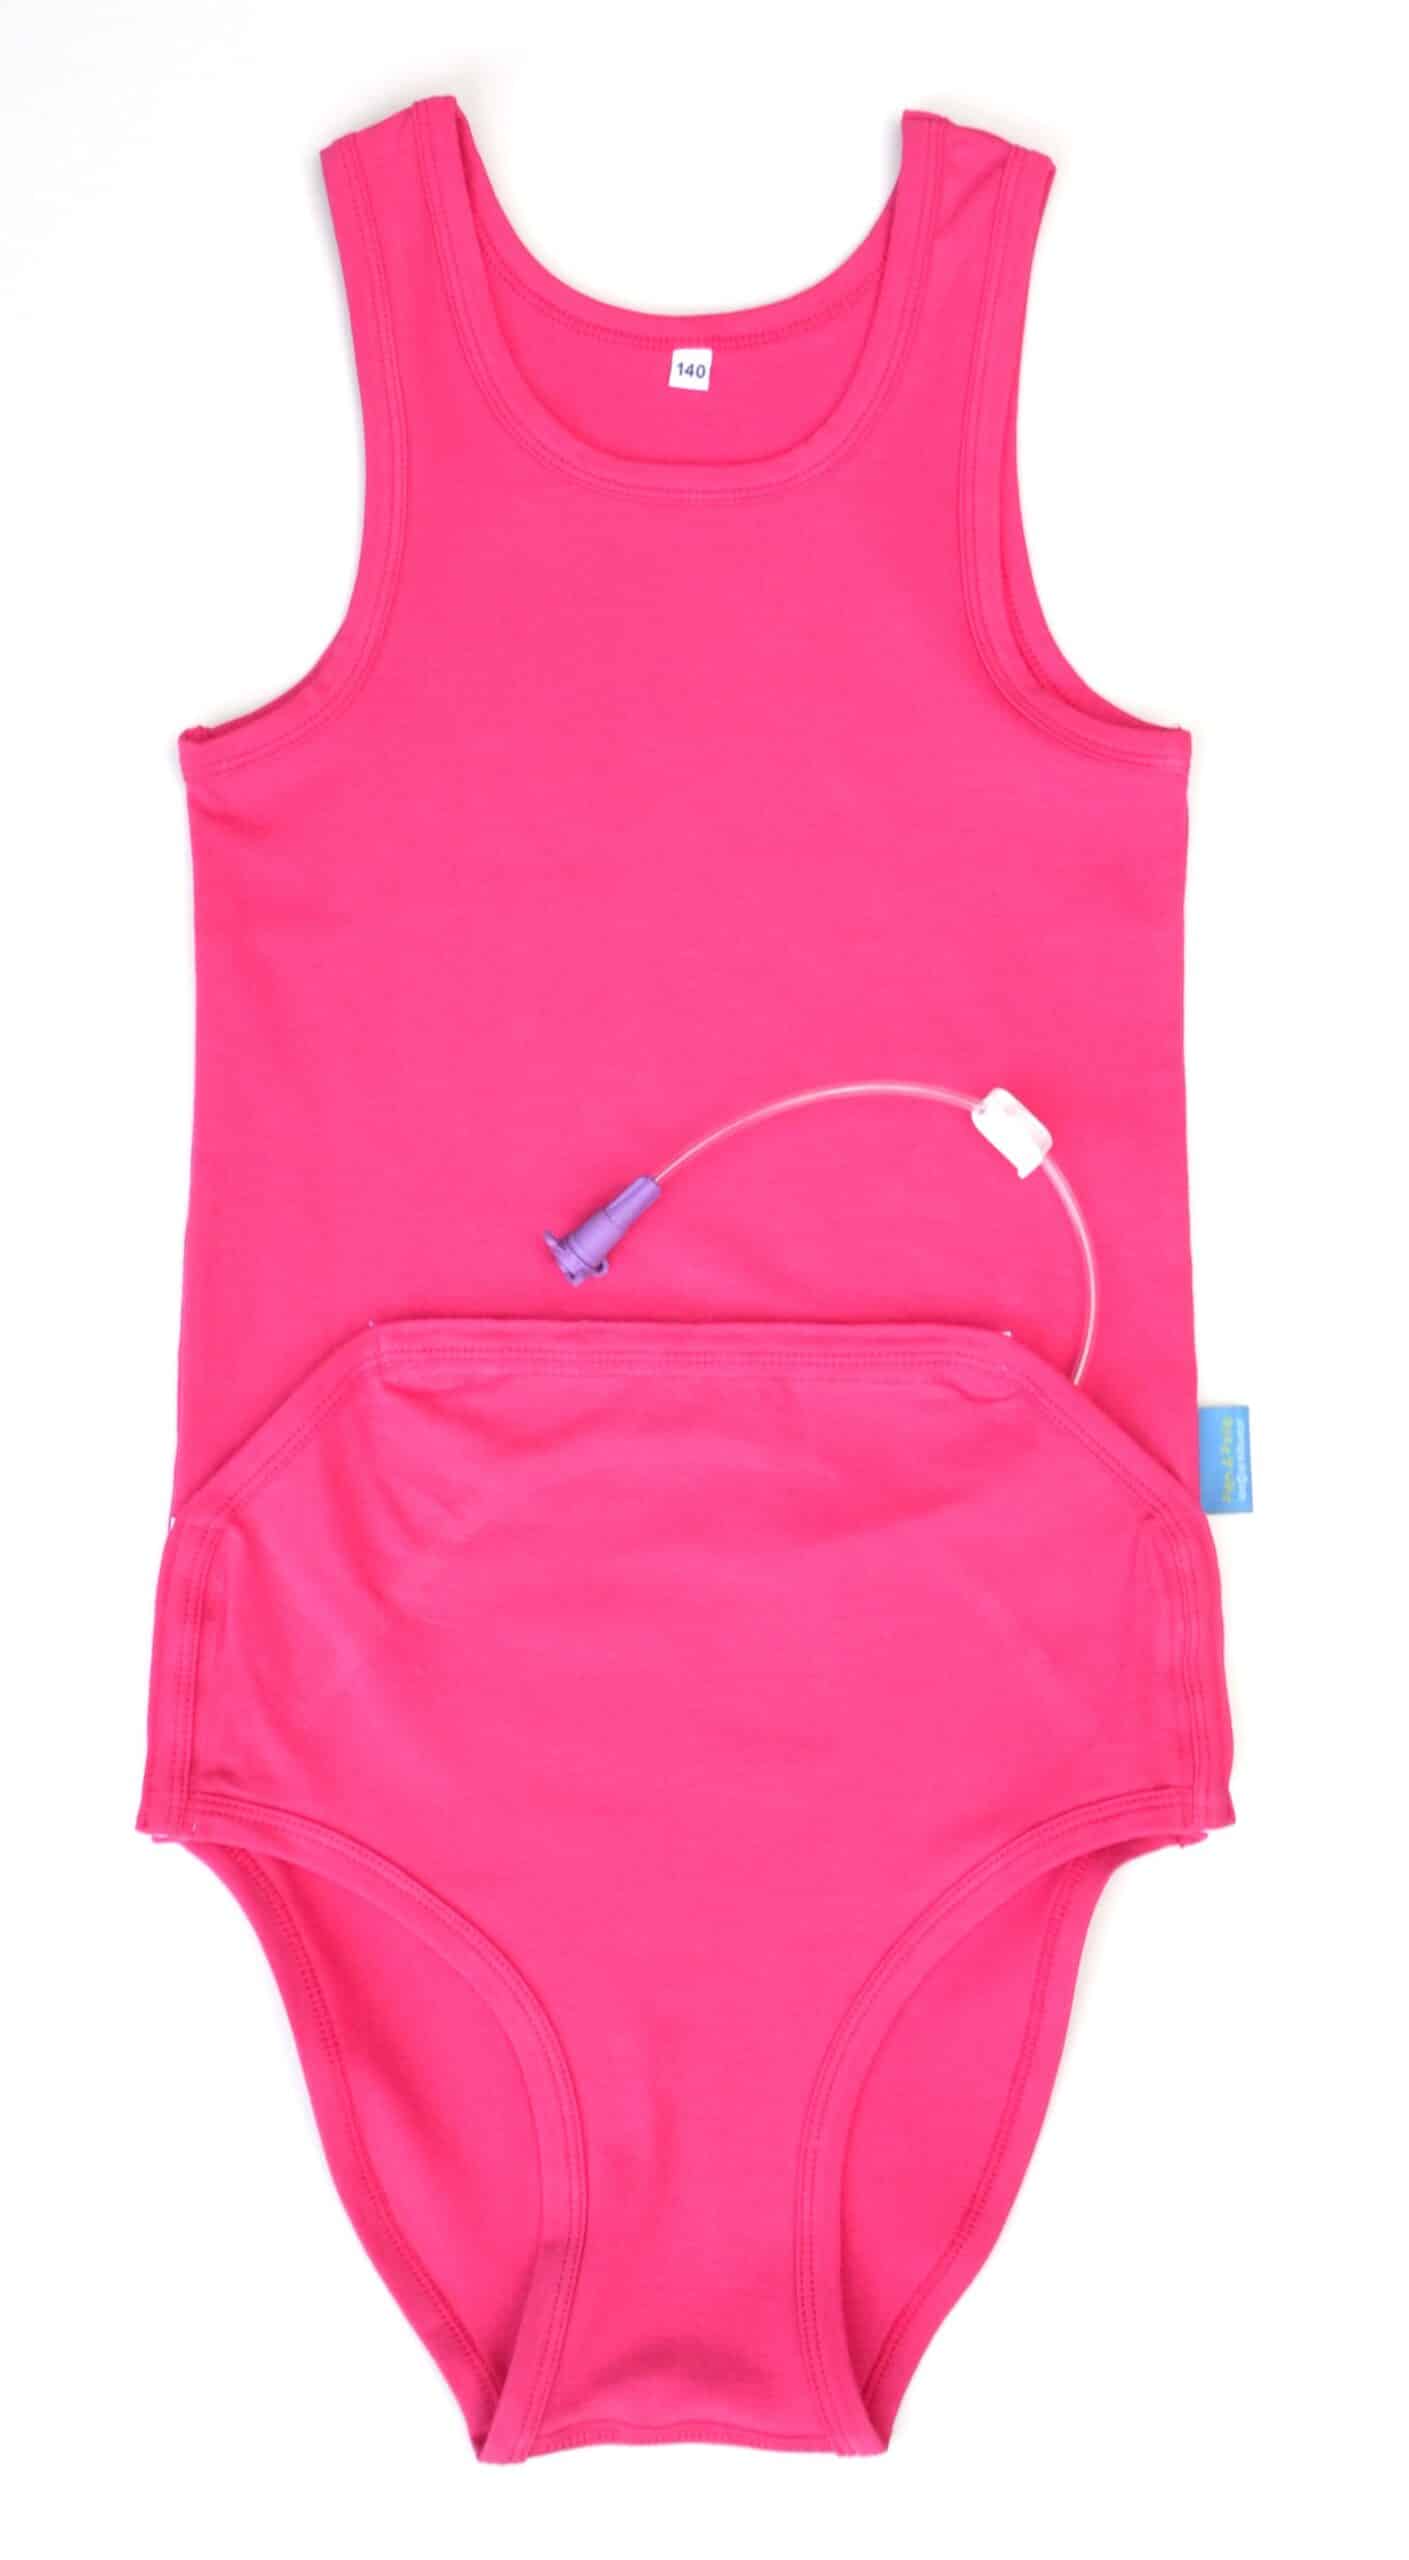 romper with belly closure